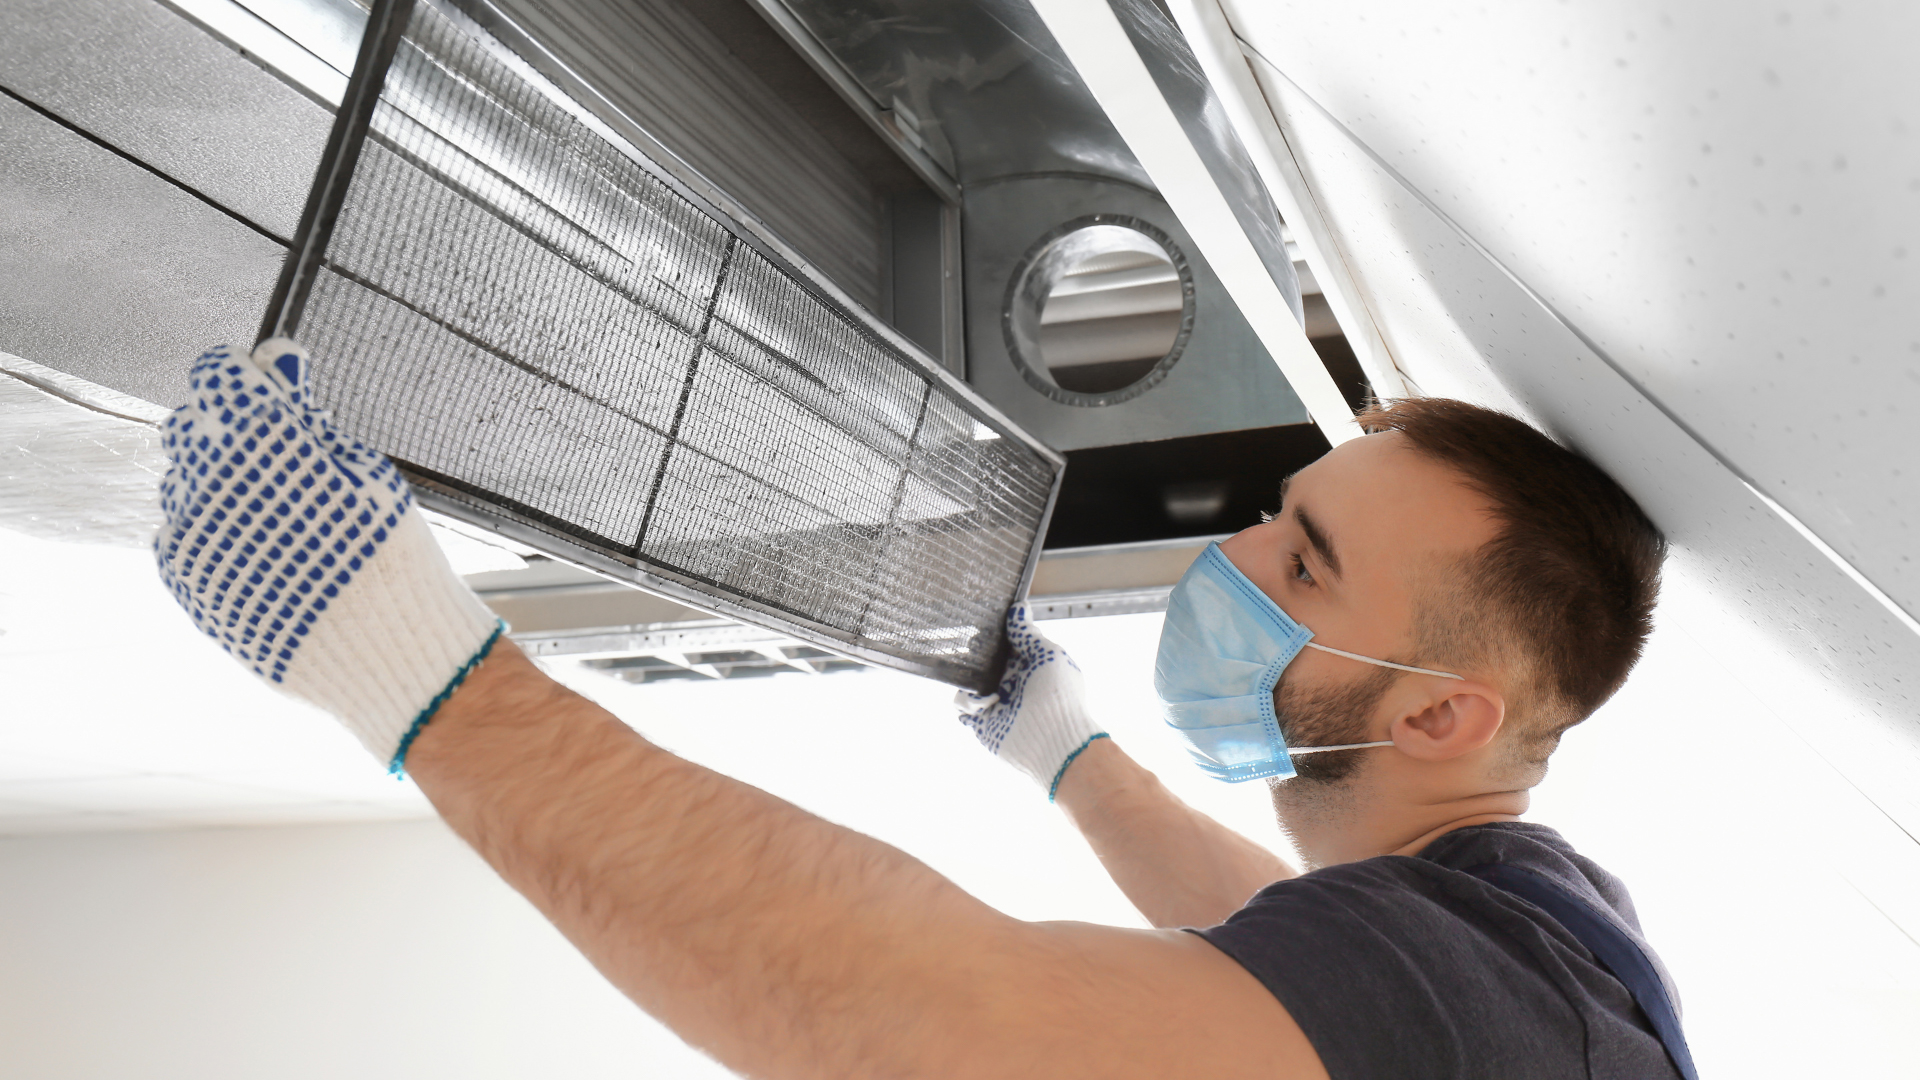 Duct Cleaning in Charleston, SC with Fix-it 24/7 Air Conditioning, Plumbing & Heating